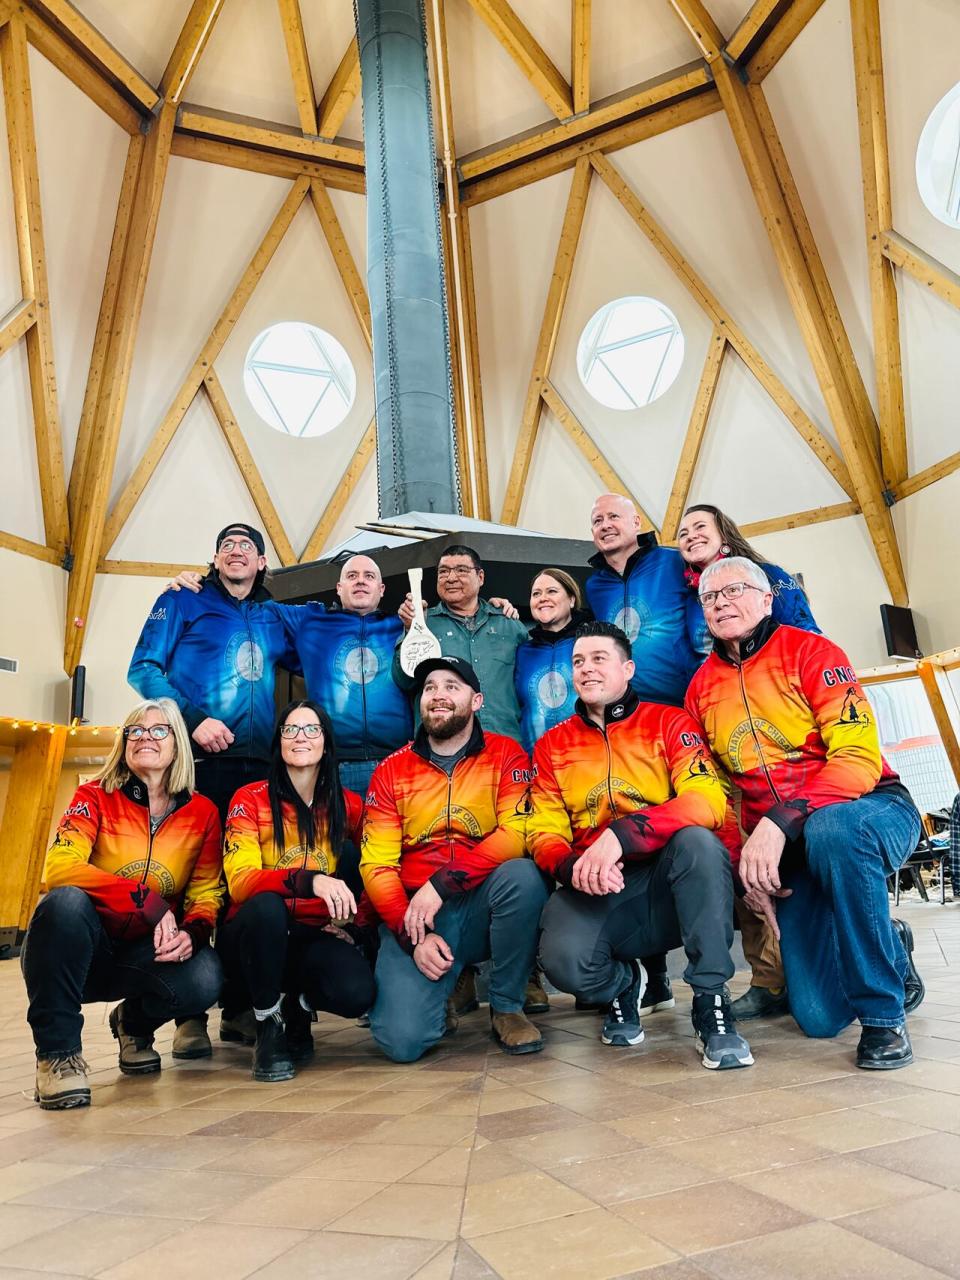 Ten of Canada's top Indigenous curlers have gathered in the Cree Nation of Chisasibi, about 1,000 kilometres north of Montreal, for a first-of-its-kind game to help inspire Indigenous youth to enter sports. (Devin Heroux/CBC Sports - image credit)